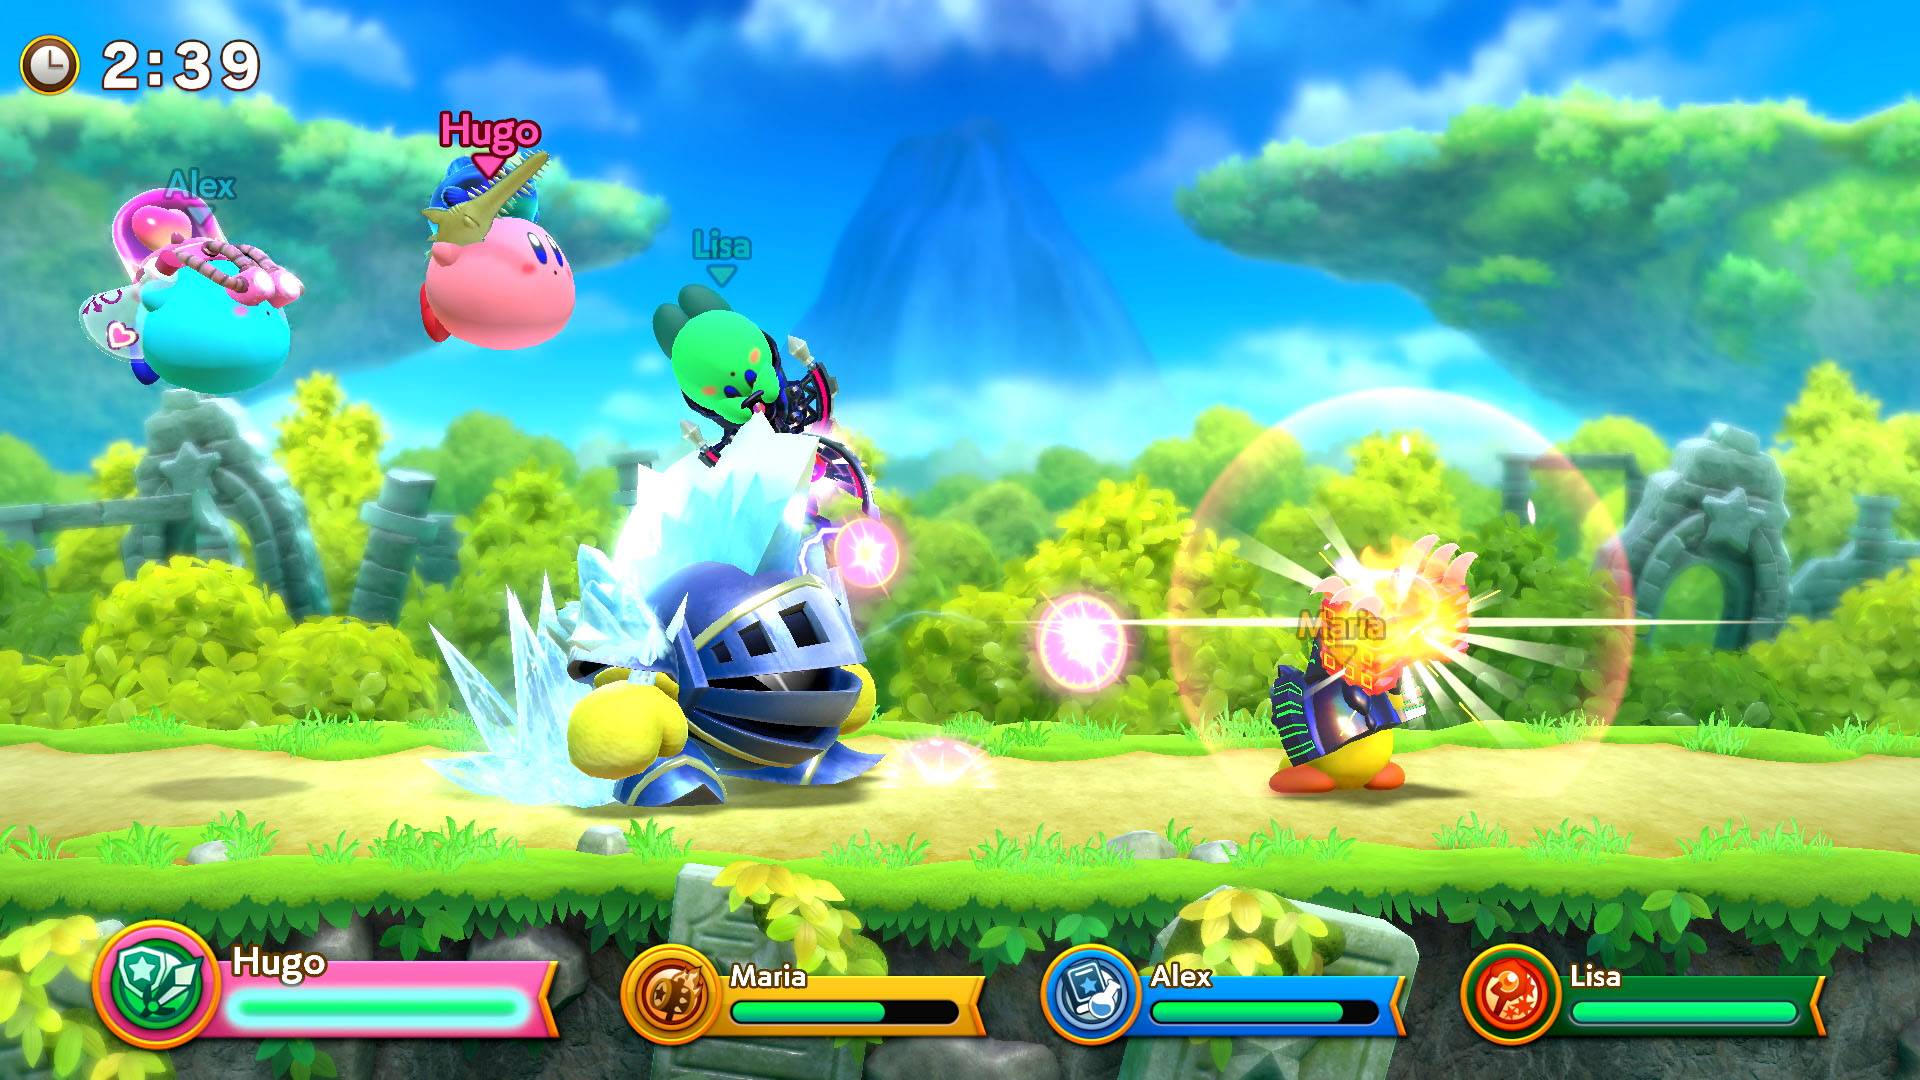 Four kirby characters are shown attacking a large enemy simultaneously 